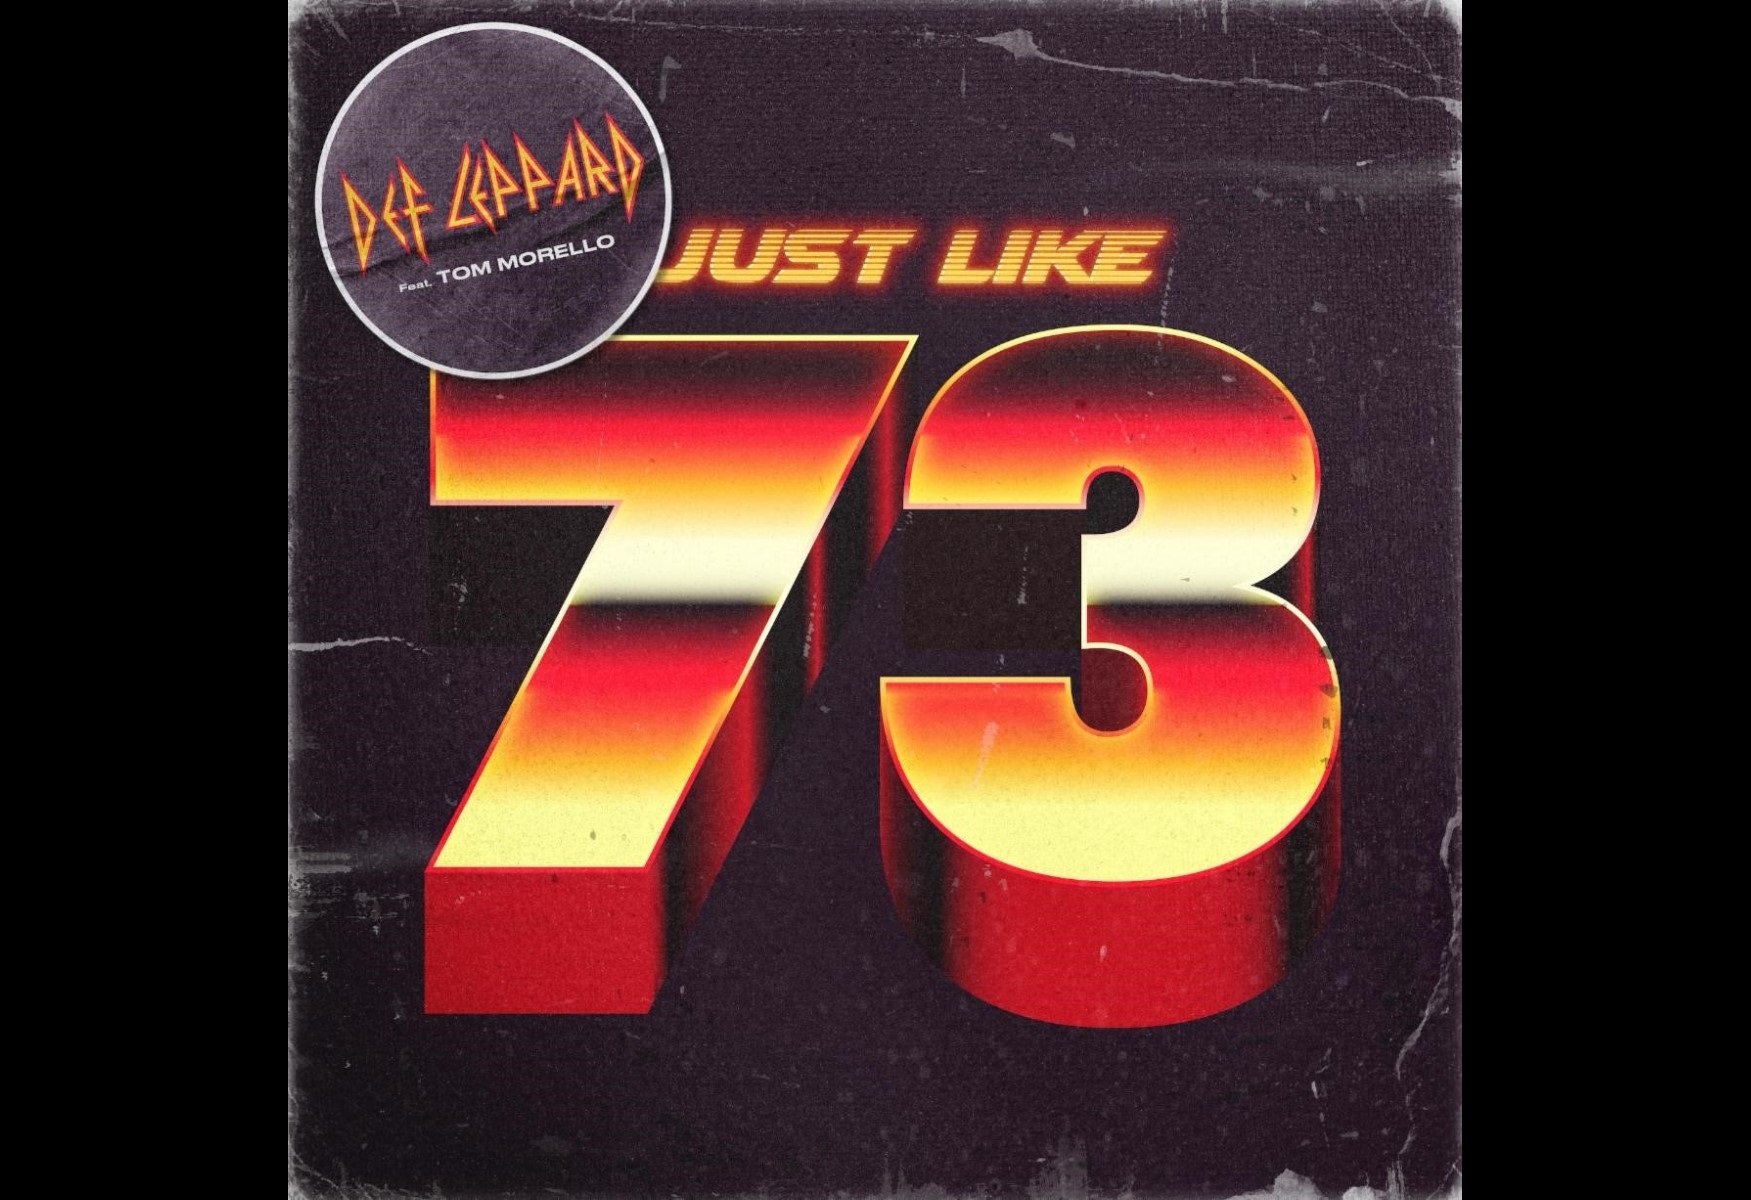 Listen To Brand New Def Leppard Song "Just Like 73"